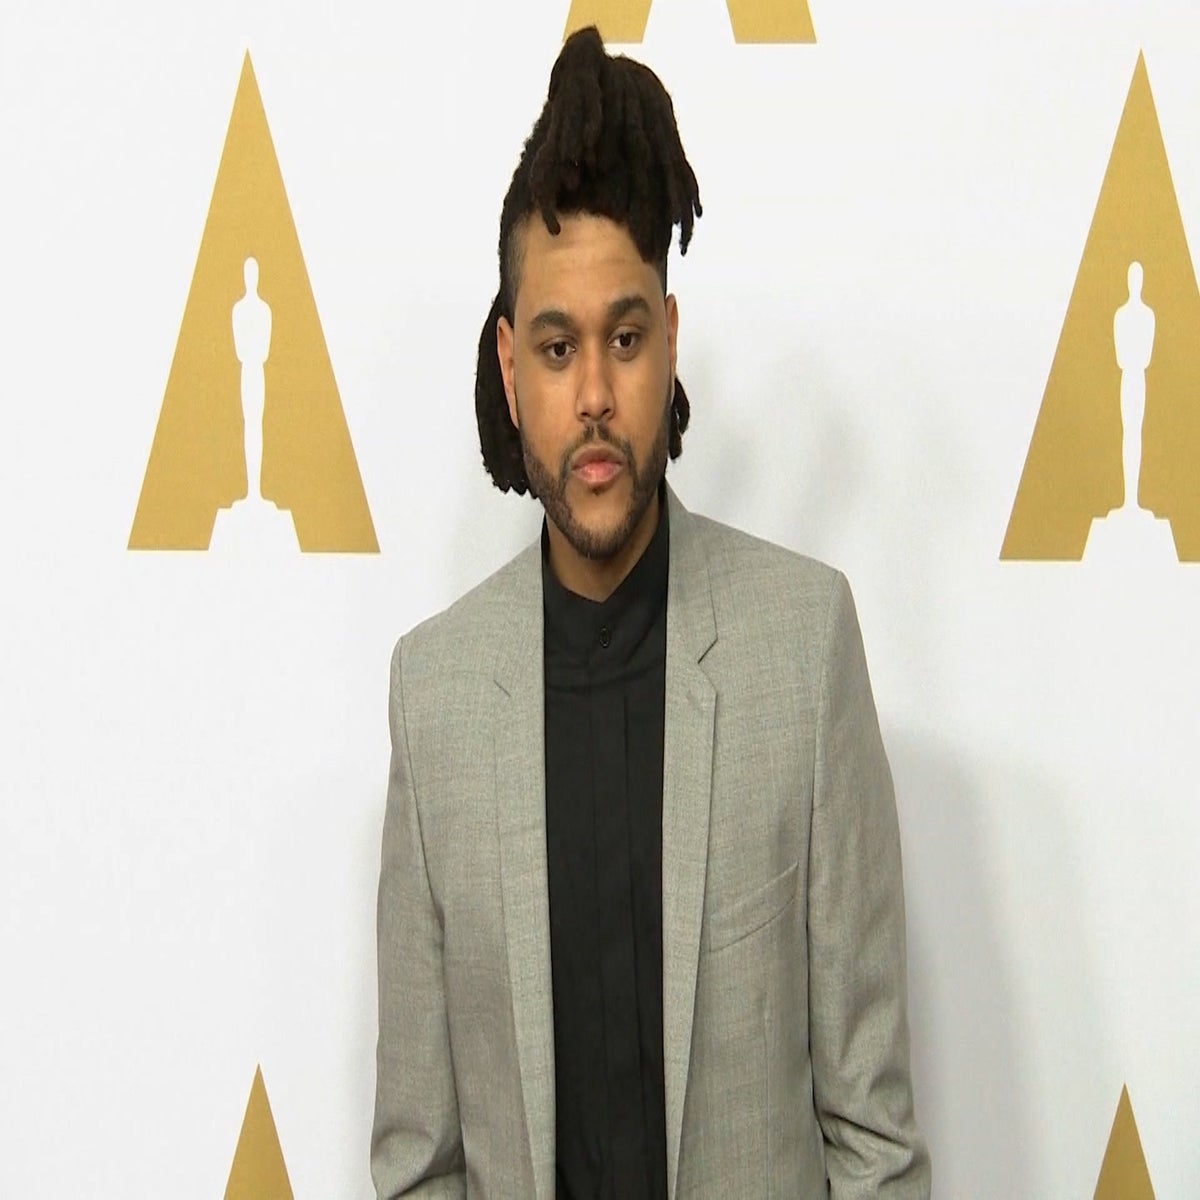 The Weeknd Announces New Album and Debuts Album Cover for Dawn FM